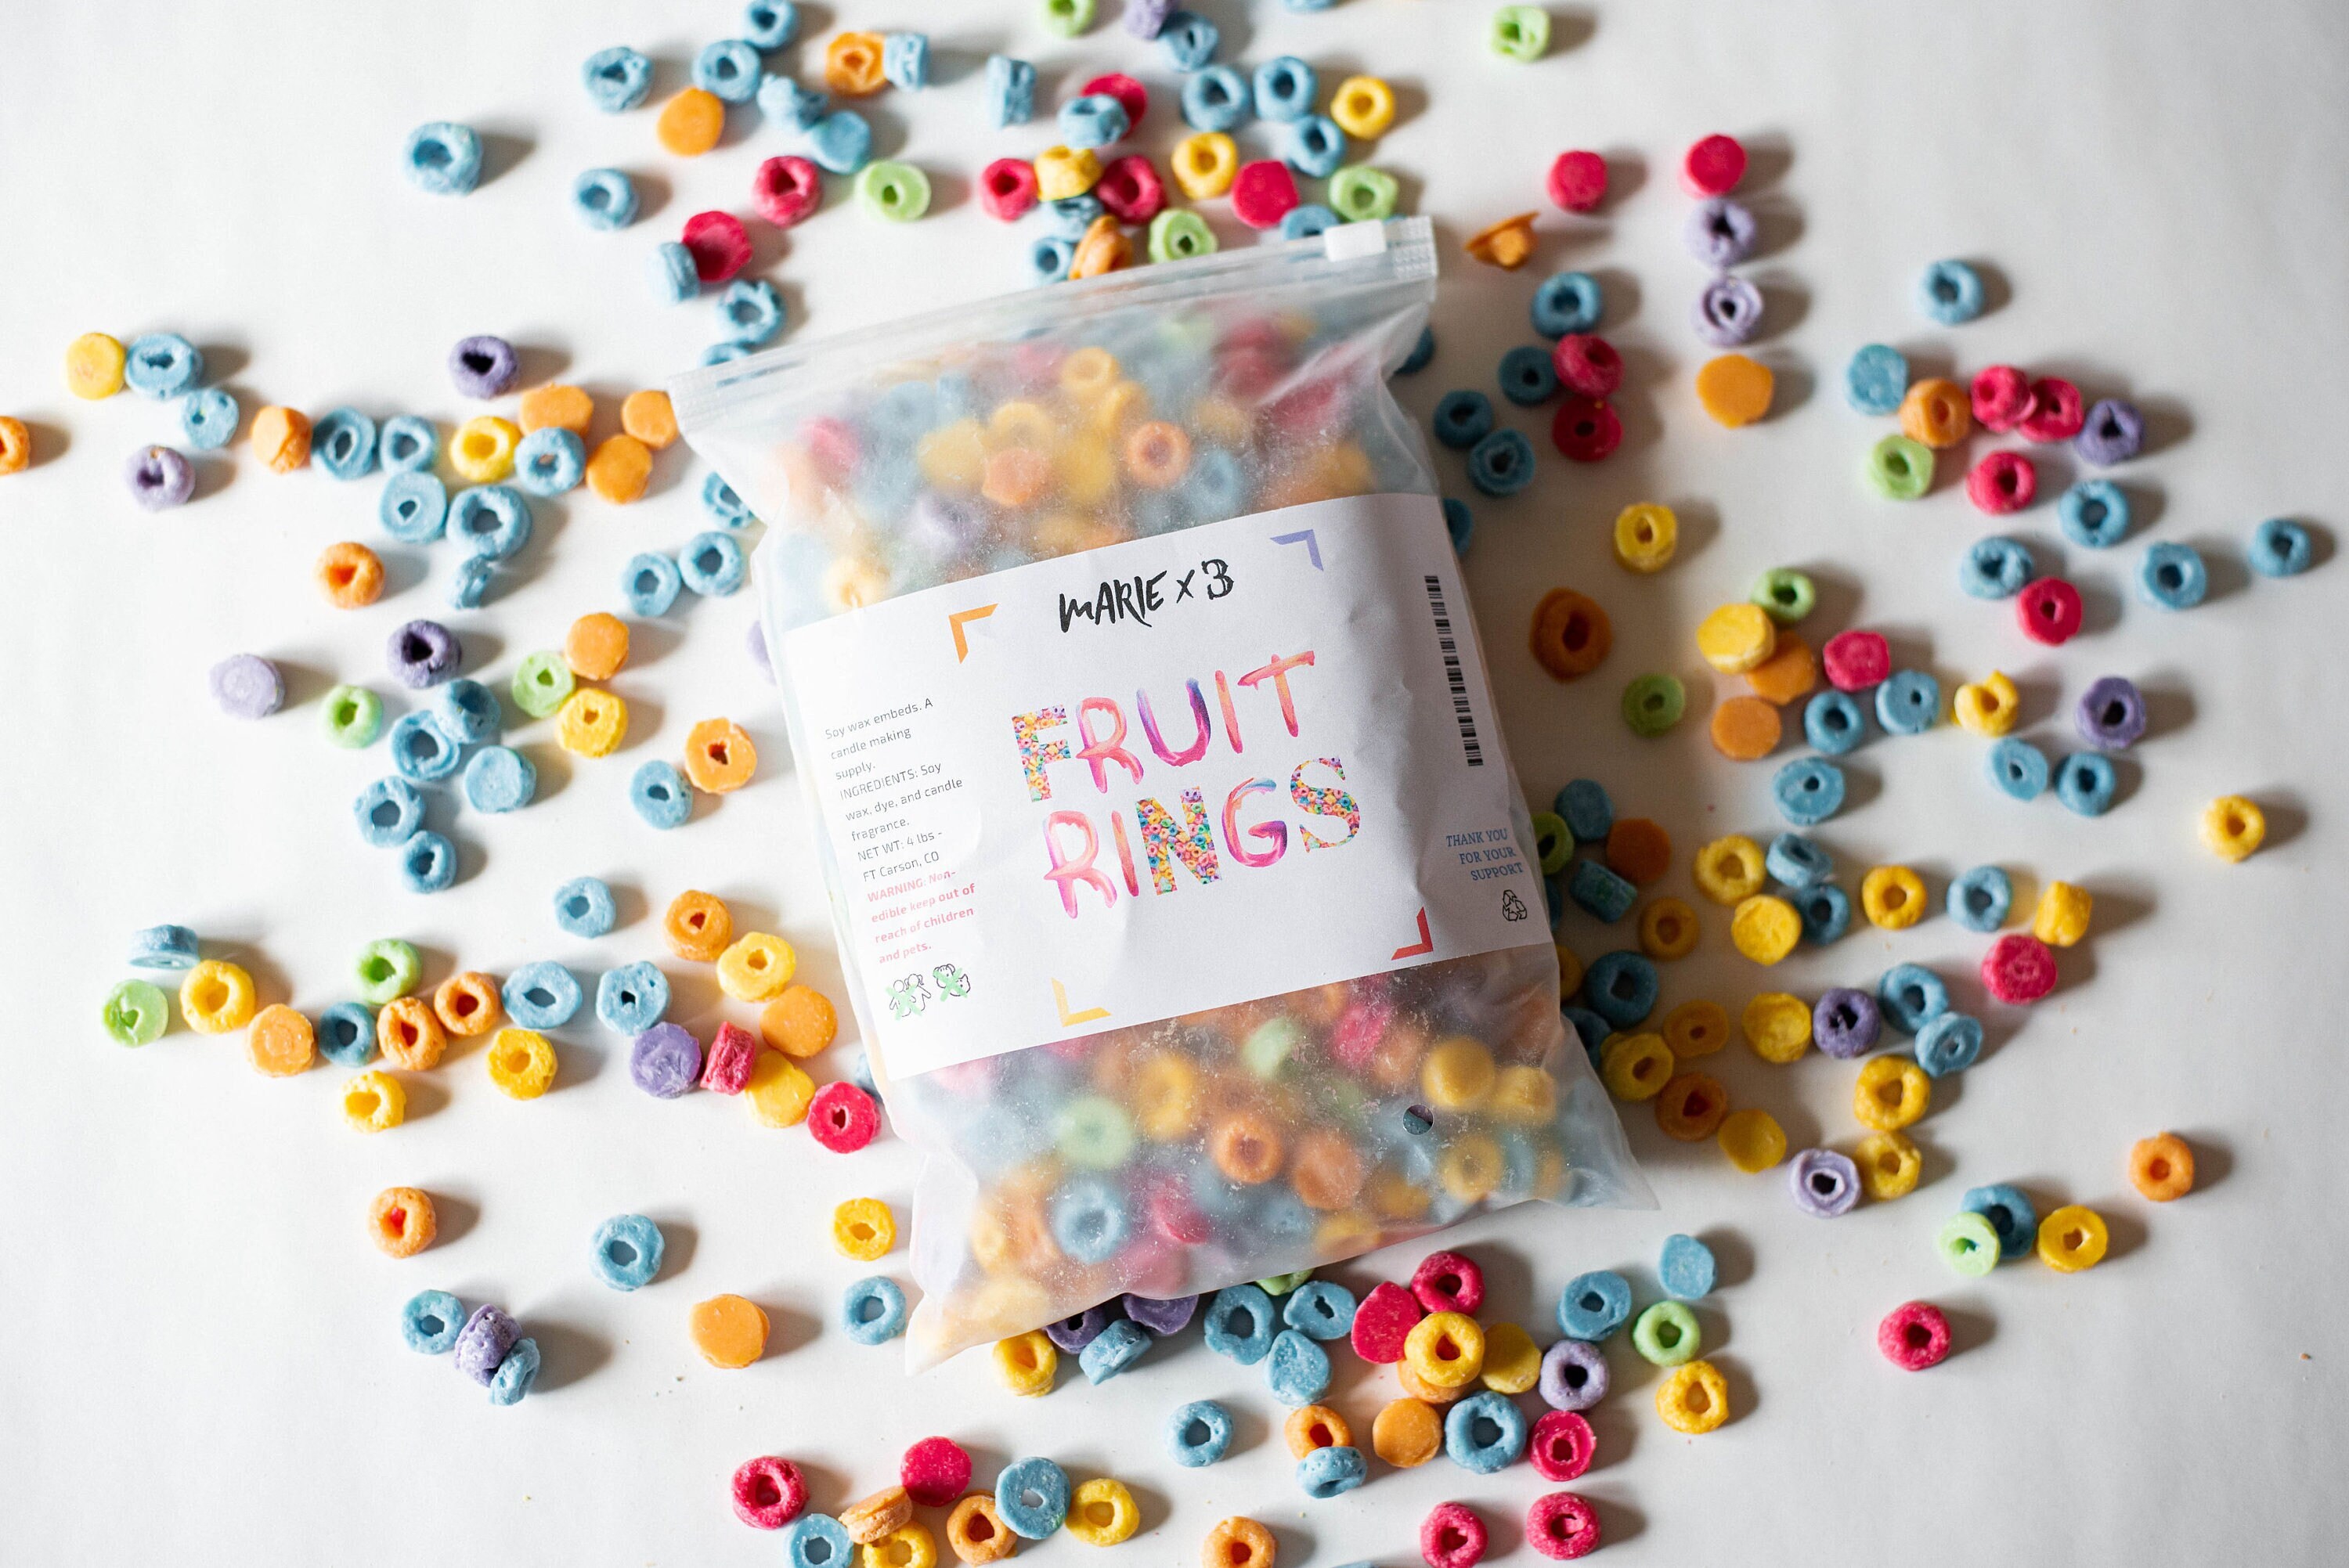 Fruit Loops Shaped and Scented Wax Embeds Pack of Wax Embeds 9oz Bag Wax  Melt Embed for Candles Fruity 